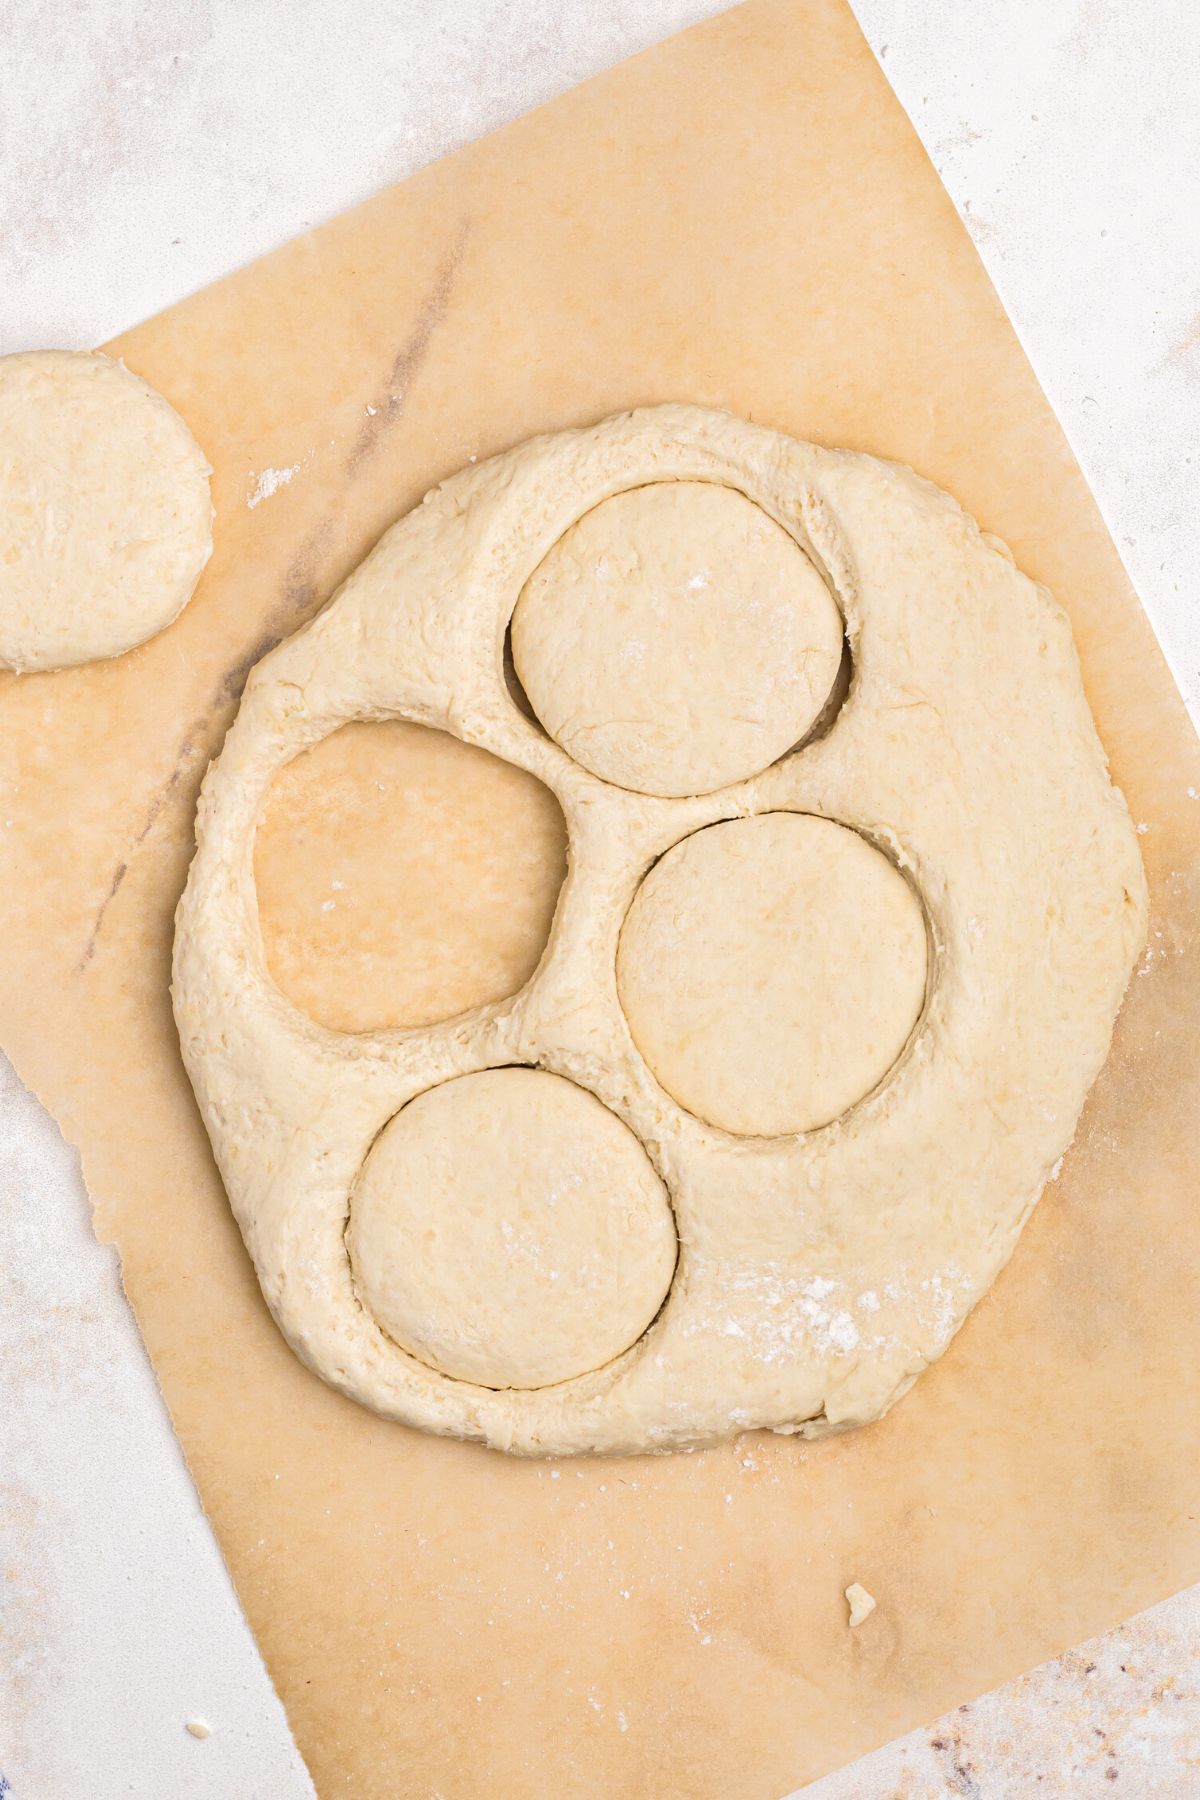 Soft biscuit dough rolled out and cut into circles on a parchment paper.